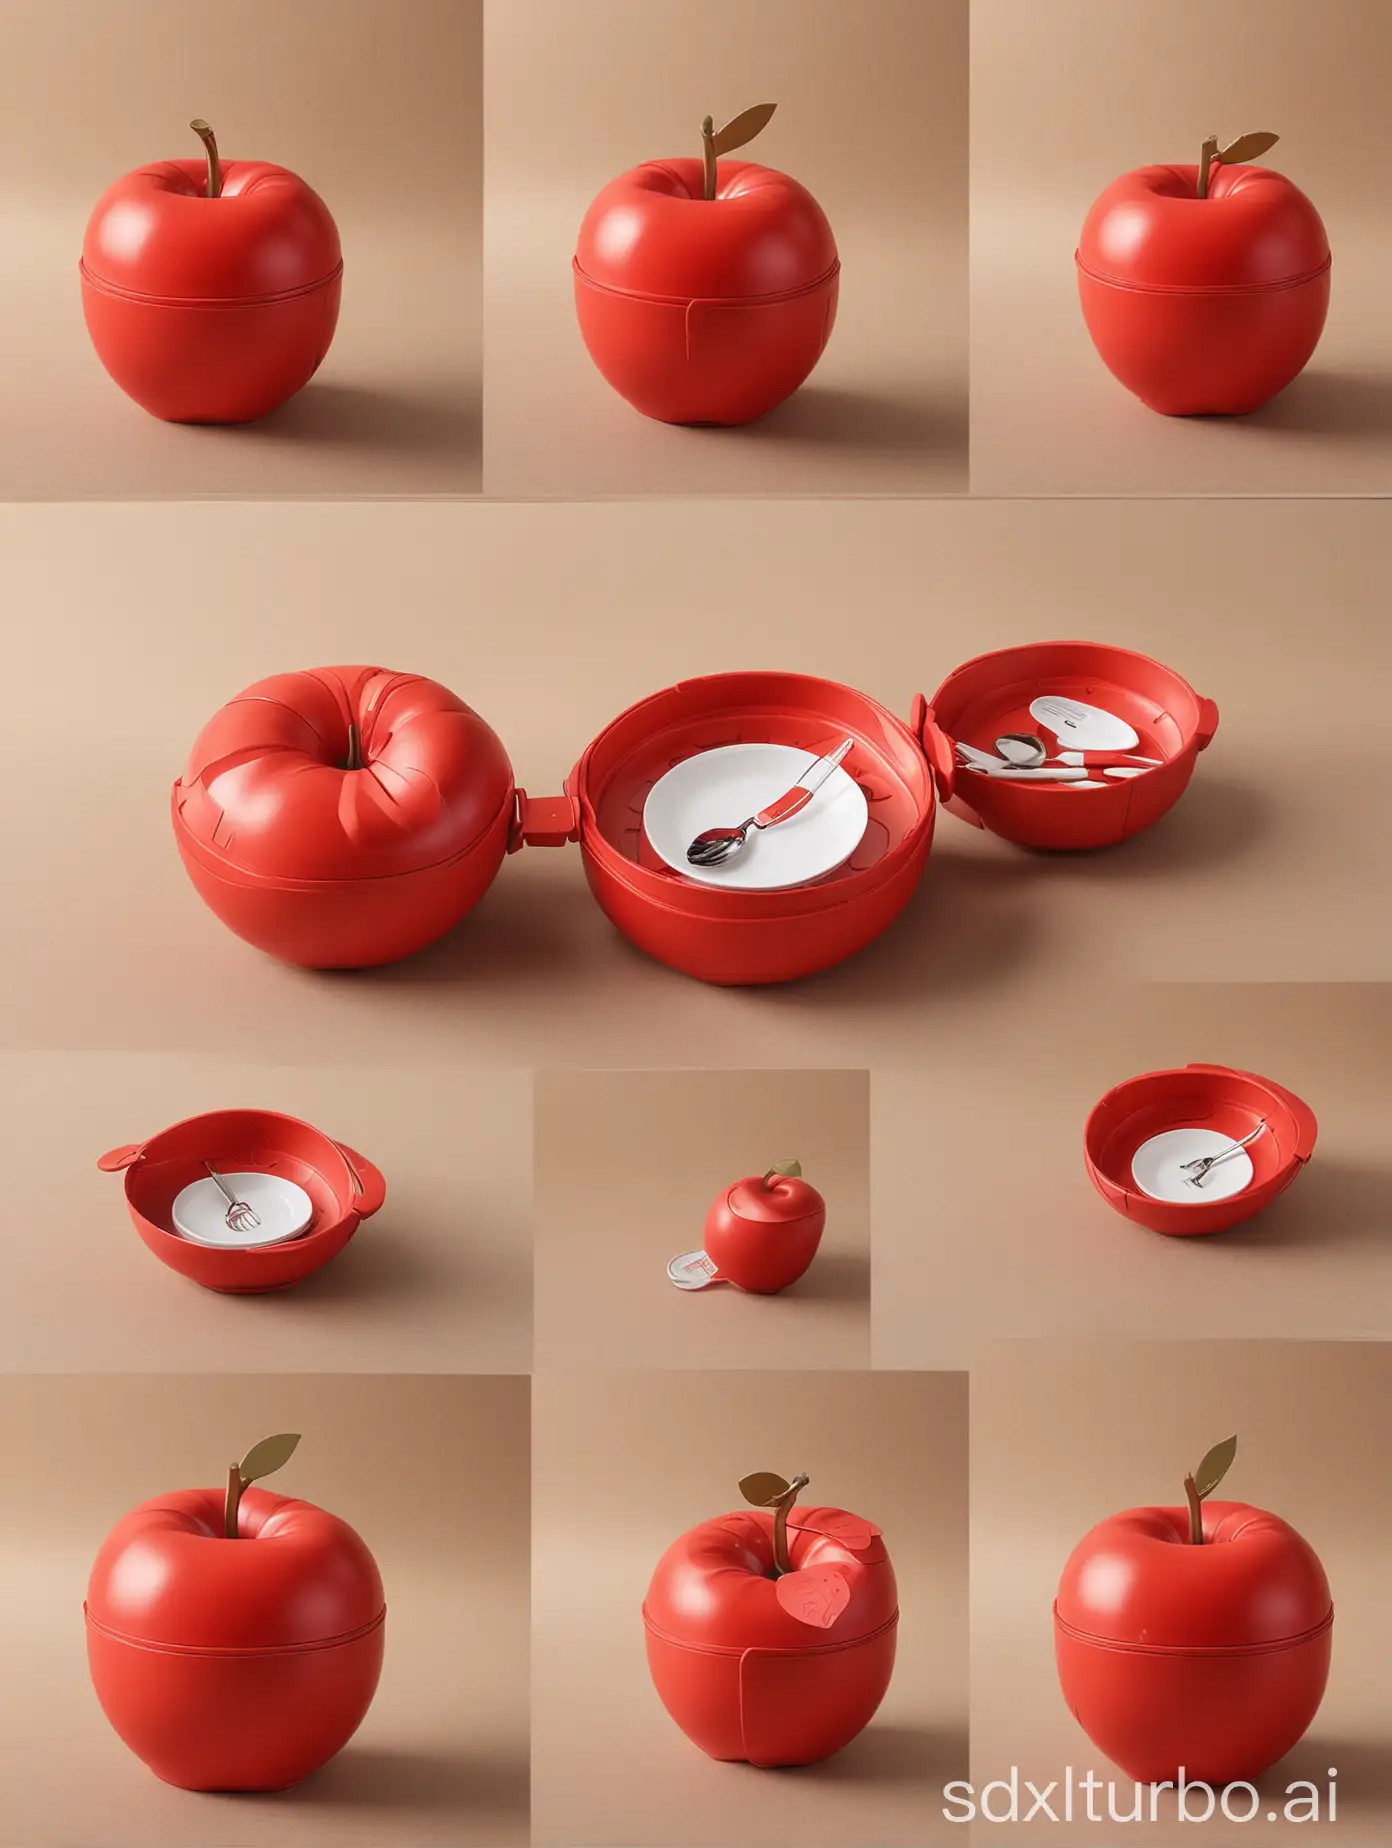 Product design Multi-functional portable tableware box， is the  portable tableware box shaped like a red apple ，creative design, Industrial storyboard design，detail design，sketch style ,step-by-step deduction for drawing a Multi-functional portable tableware box